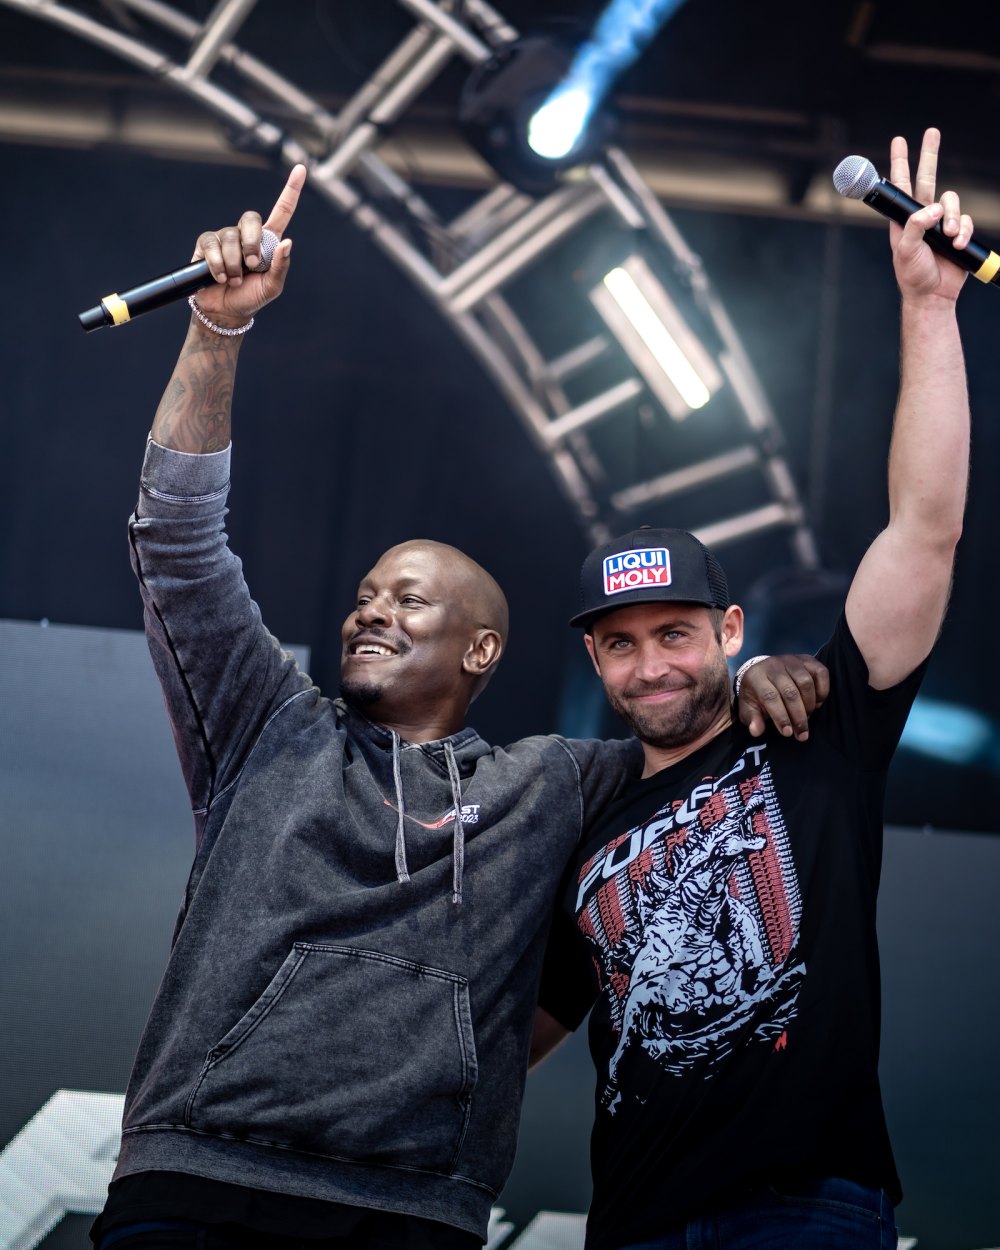 Tyrese Gibson and Cody Walker Are Proud to Honor Paul Walker at FuelFest